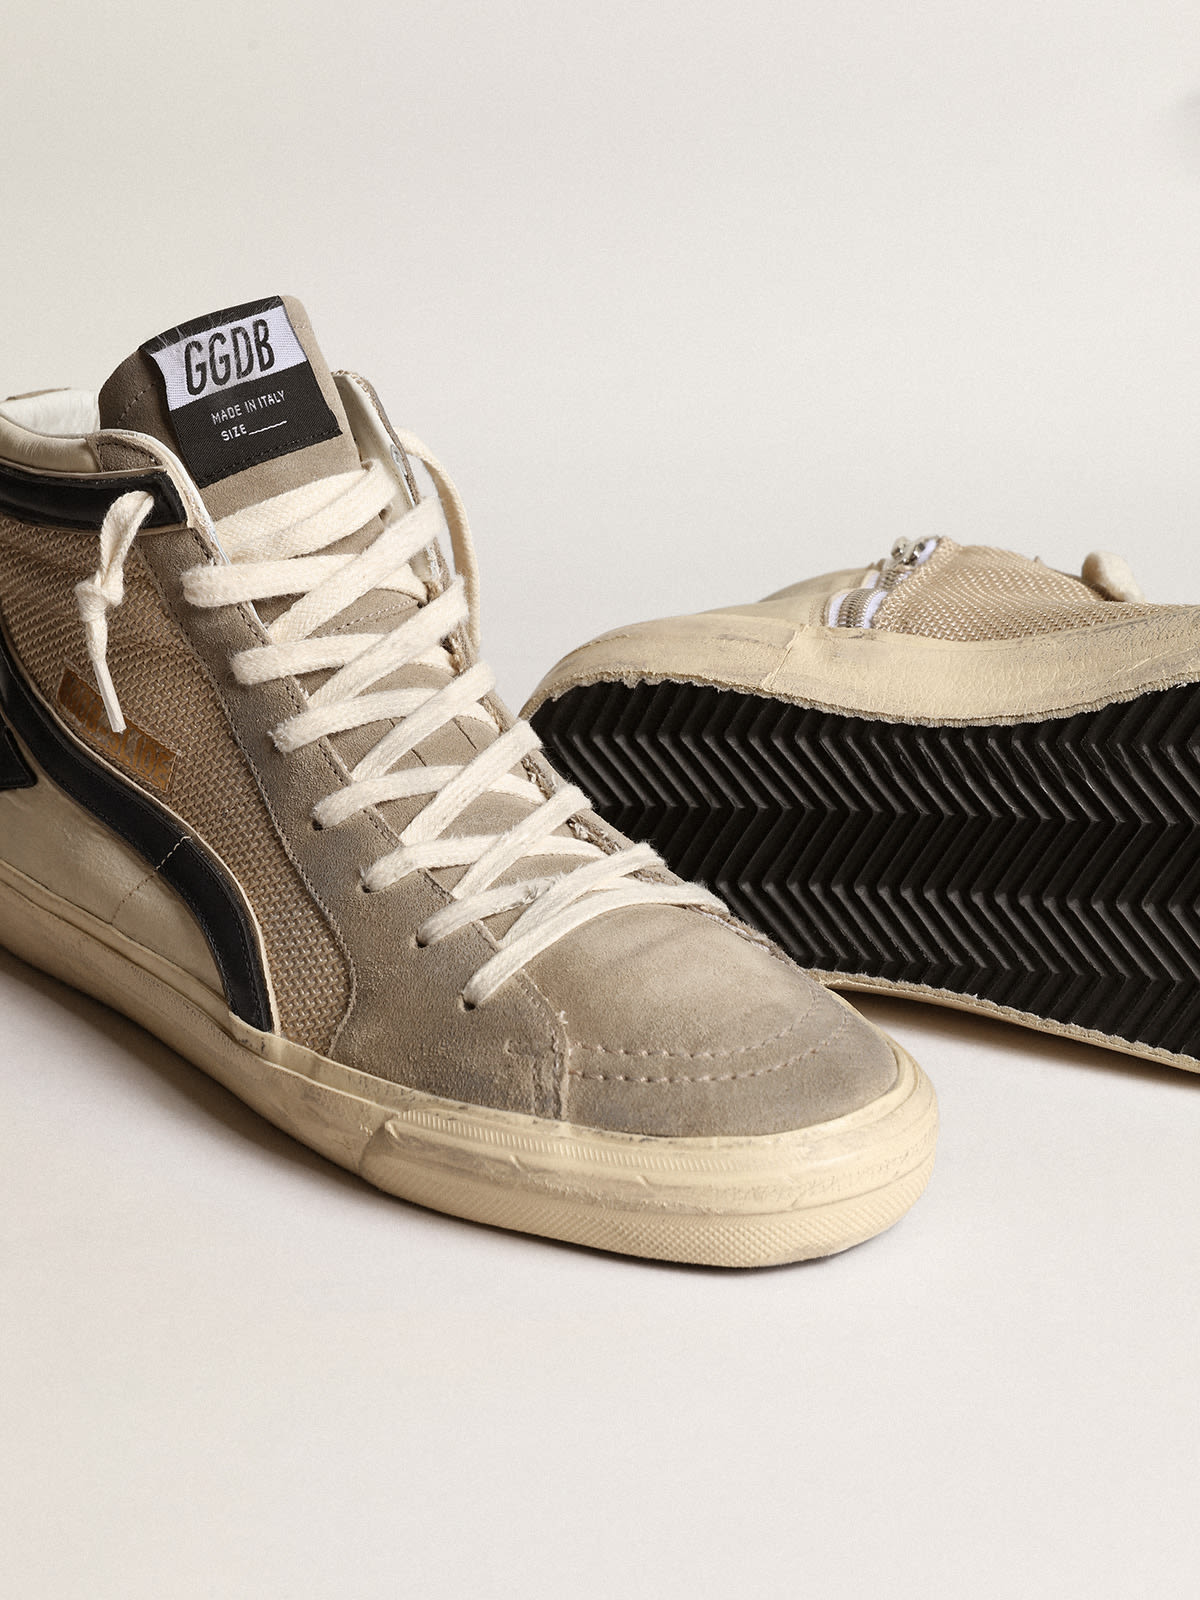 Golden Goose - Slide in beige mesh and nylon with blue leather star and flash in 